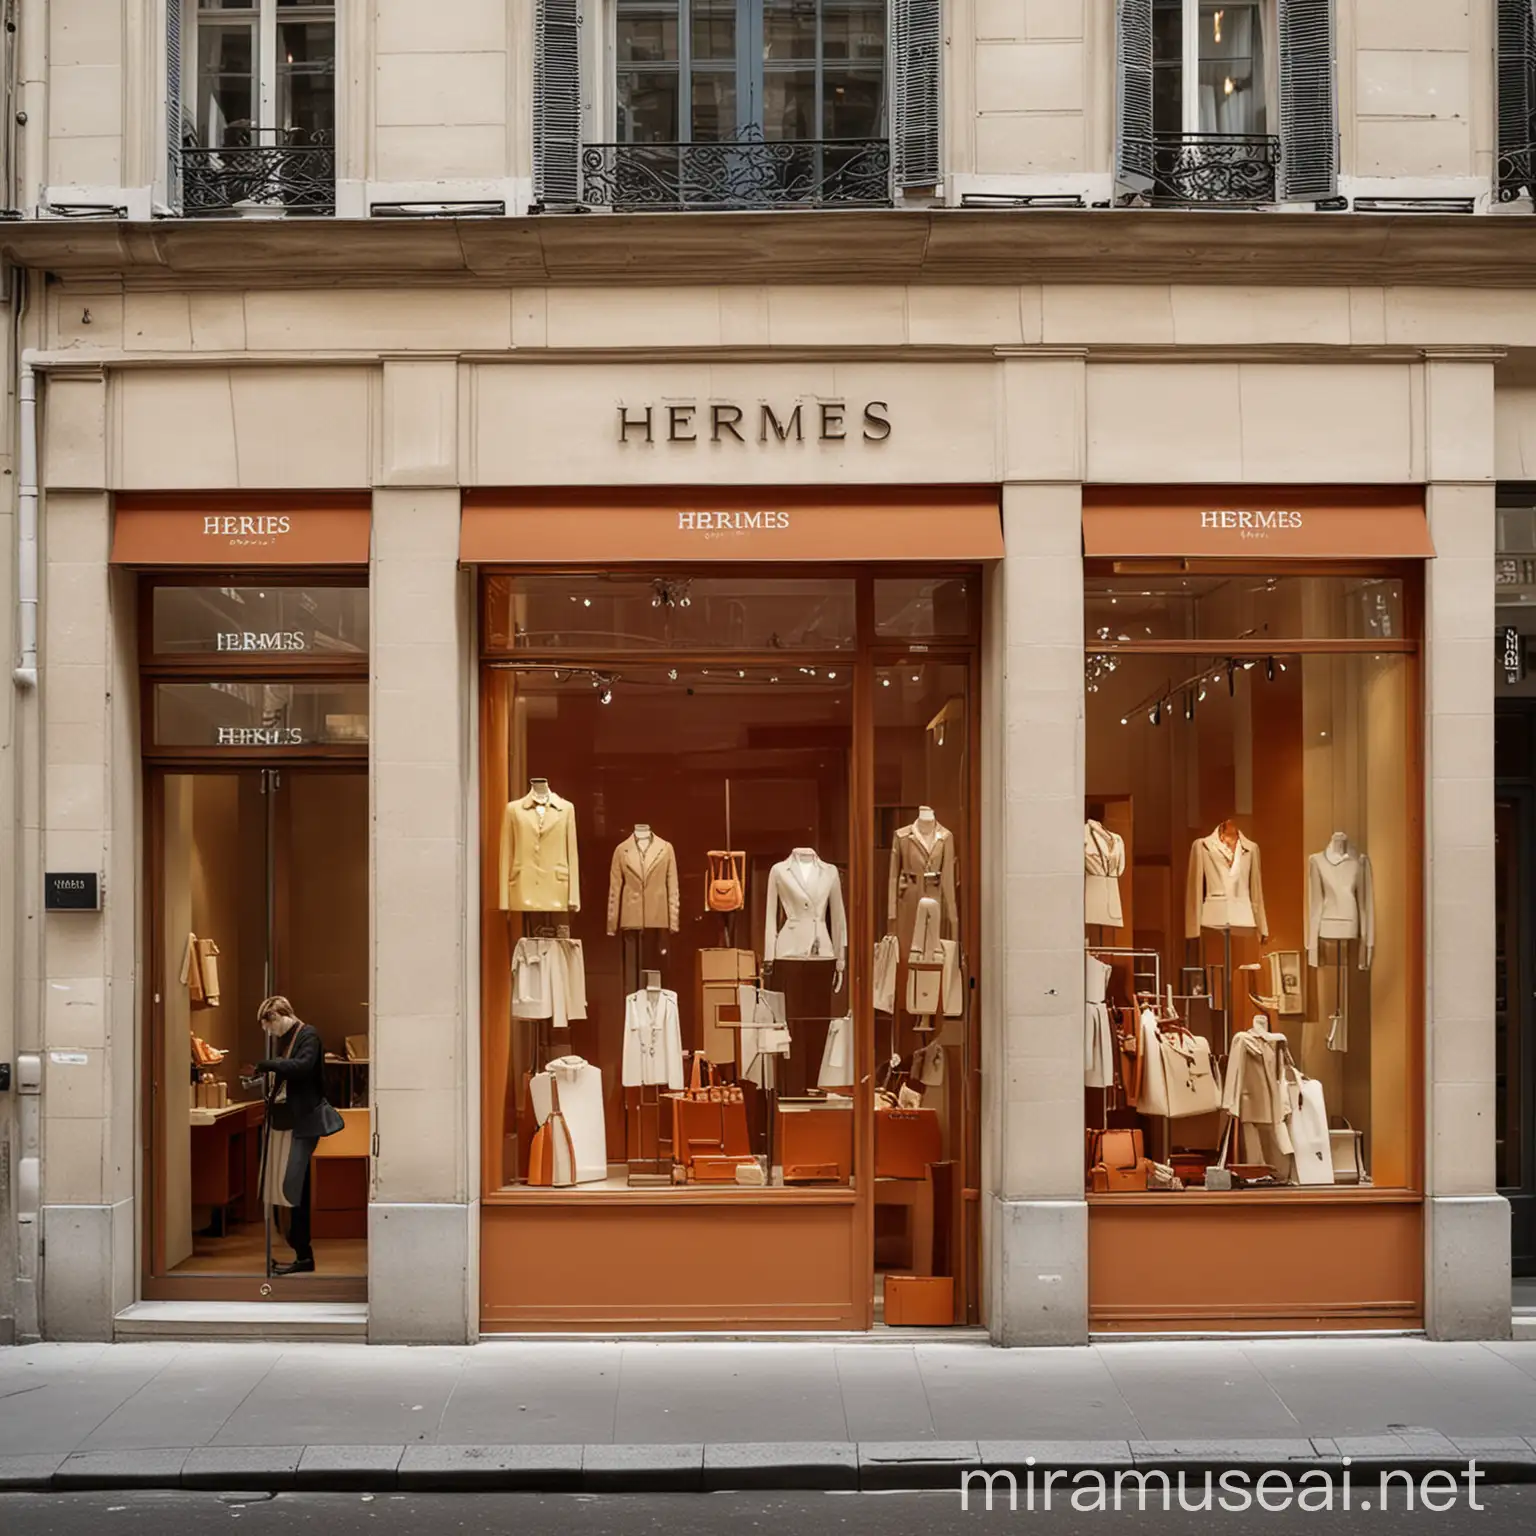 Since 1837, Hermès has remained faithful to its artisanal model and its humanist values. 
Family-run, independent and socially responsible, the company is committed to maintaining the majority of its production in France, through its 54 production sites, while developing its international distribution network of 300 stores in 45 countries.
